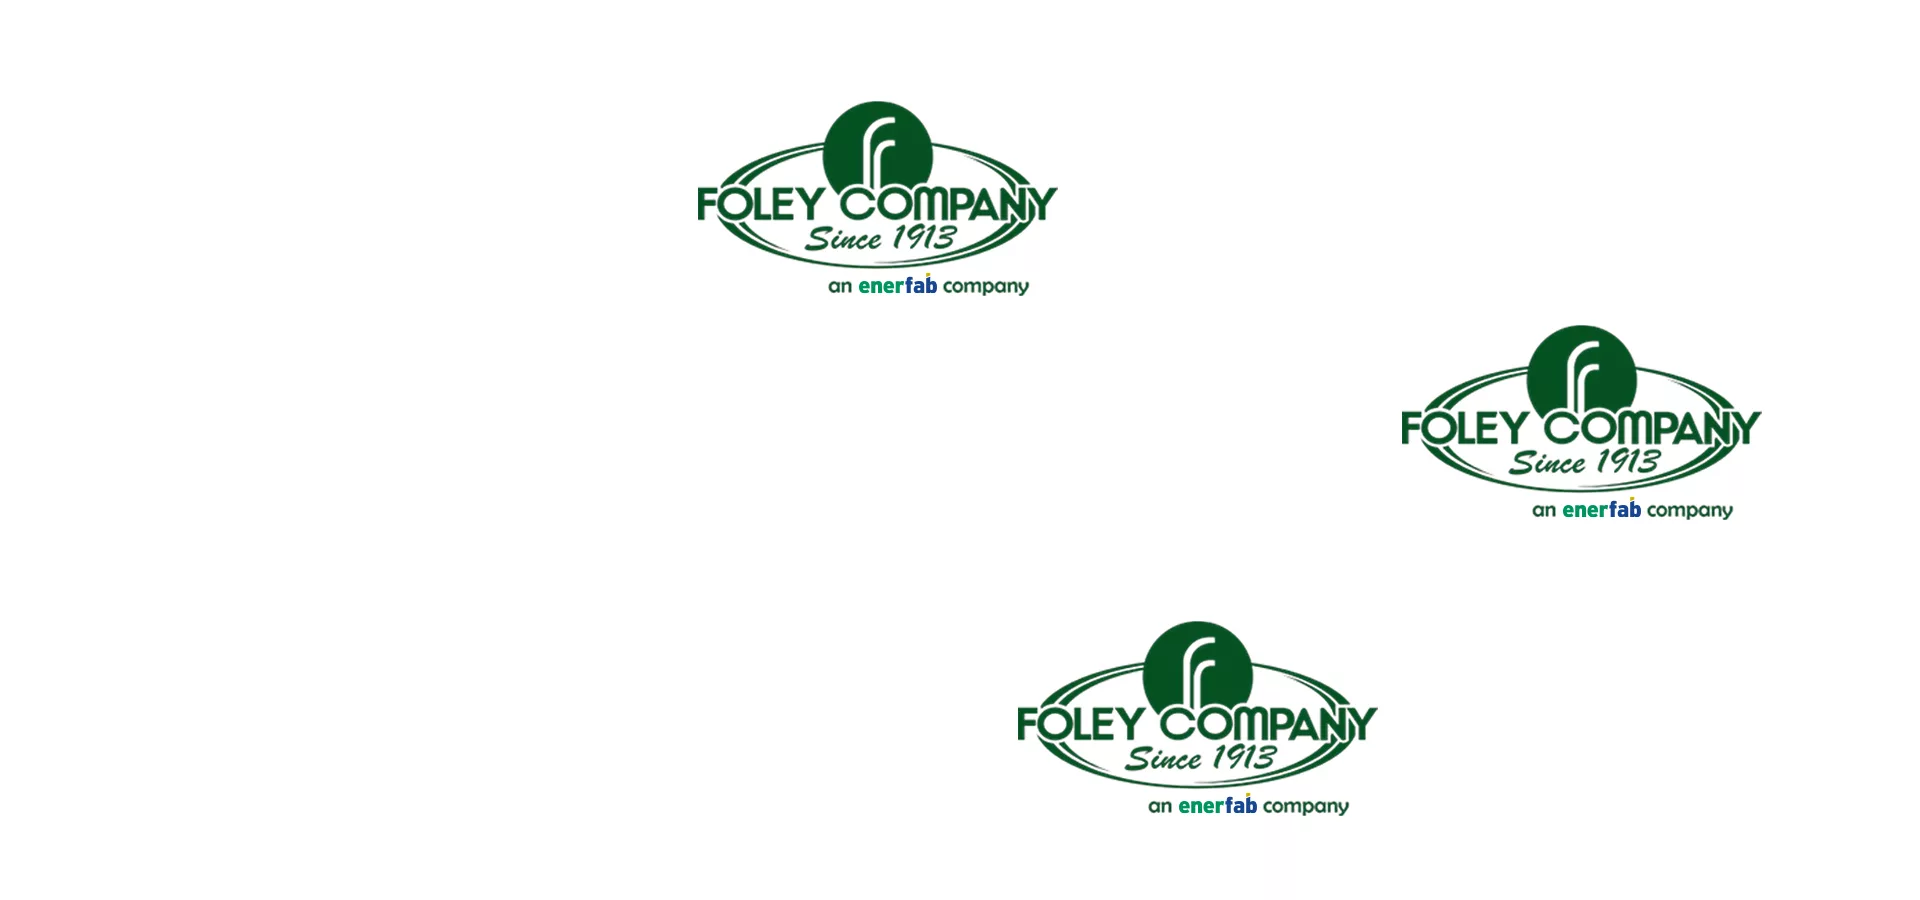 Acquisition of Foley Company